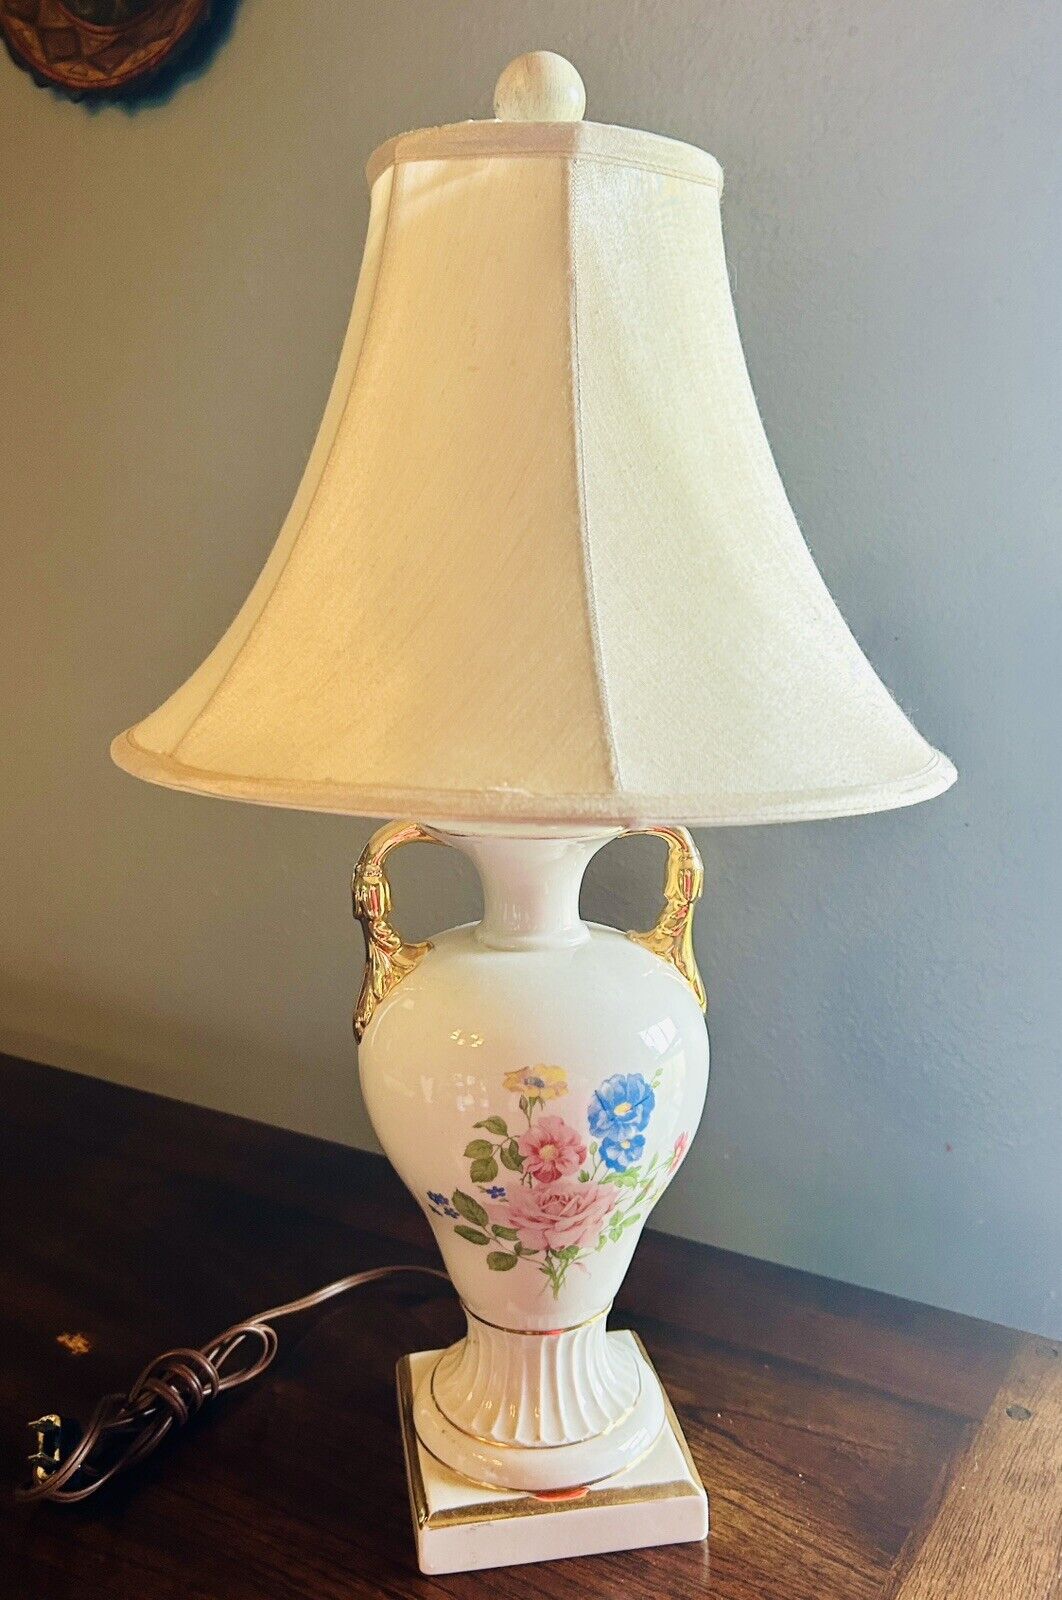 Antique Urn Ceramic 2-handle Table Lamp Painted Flowers Works Shade Harp Finial